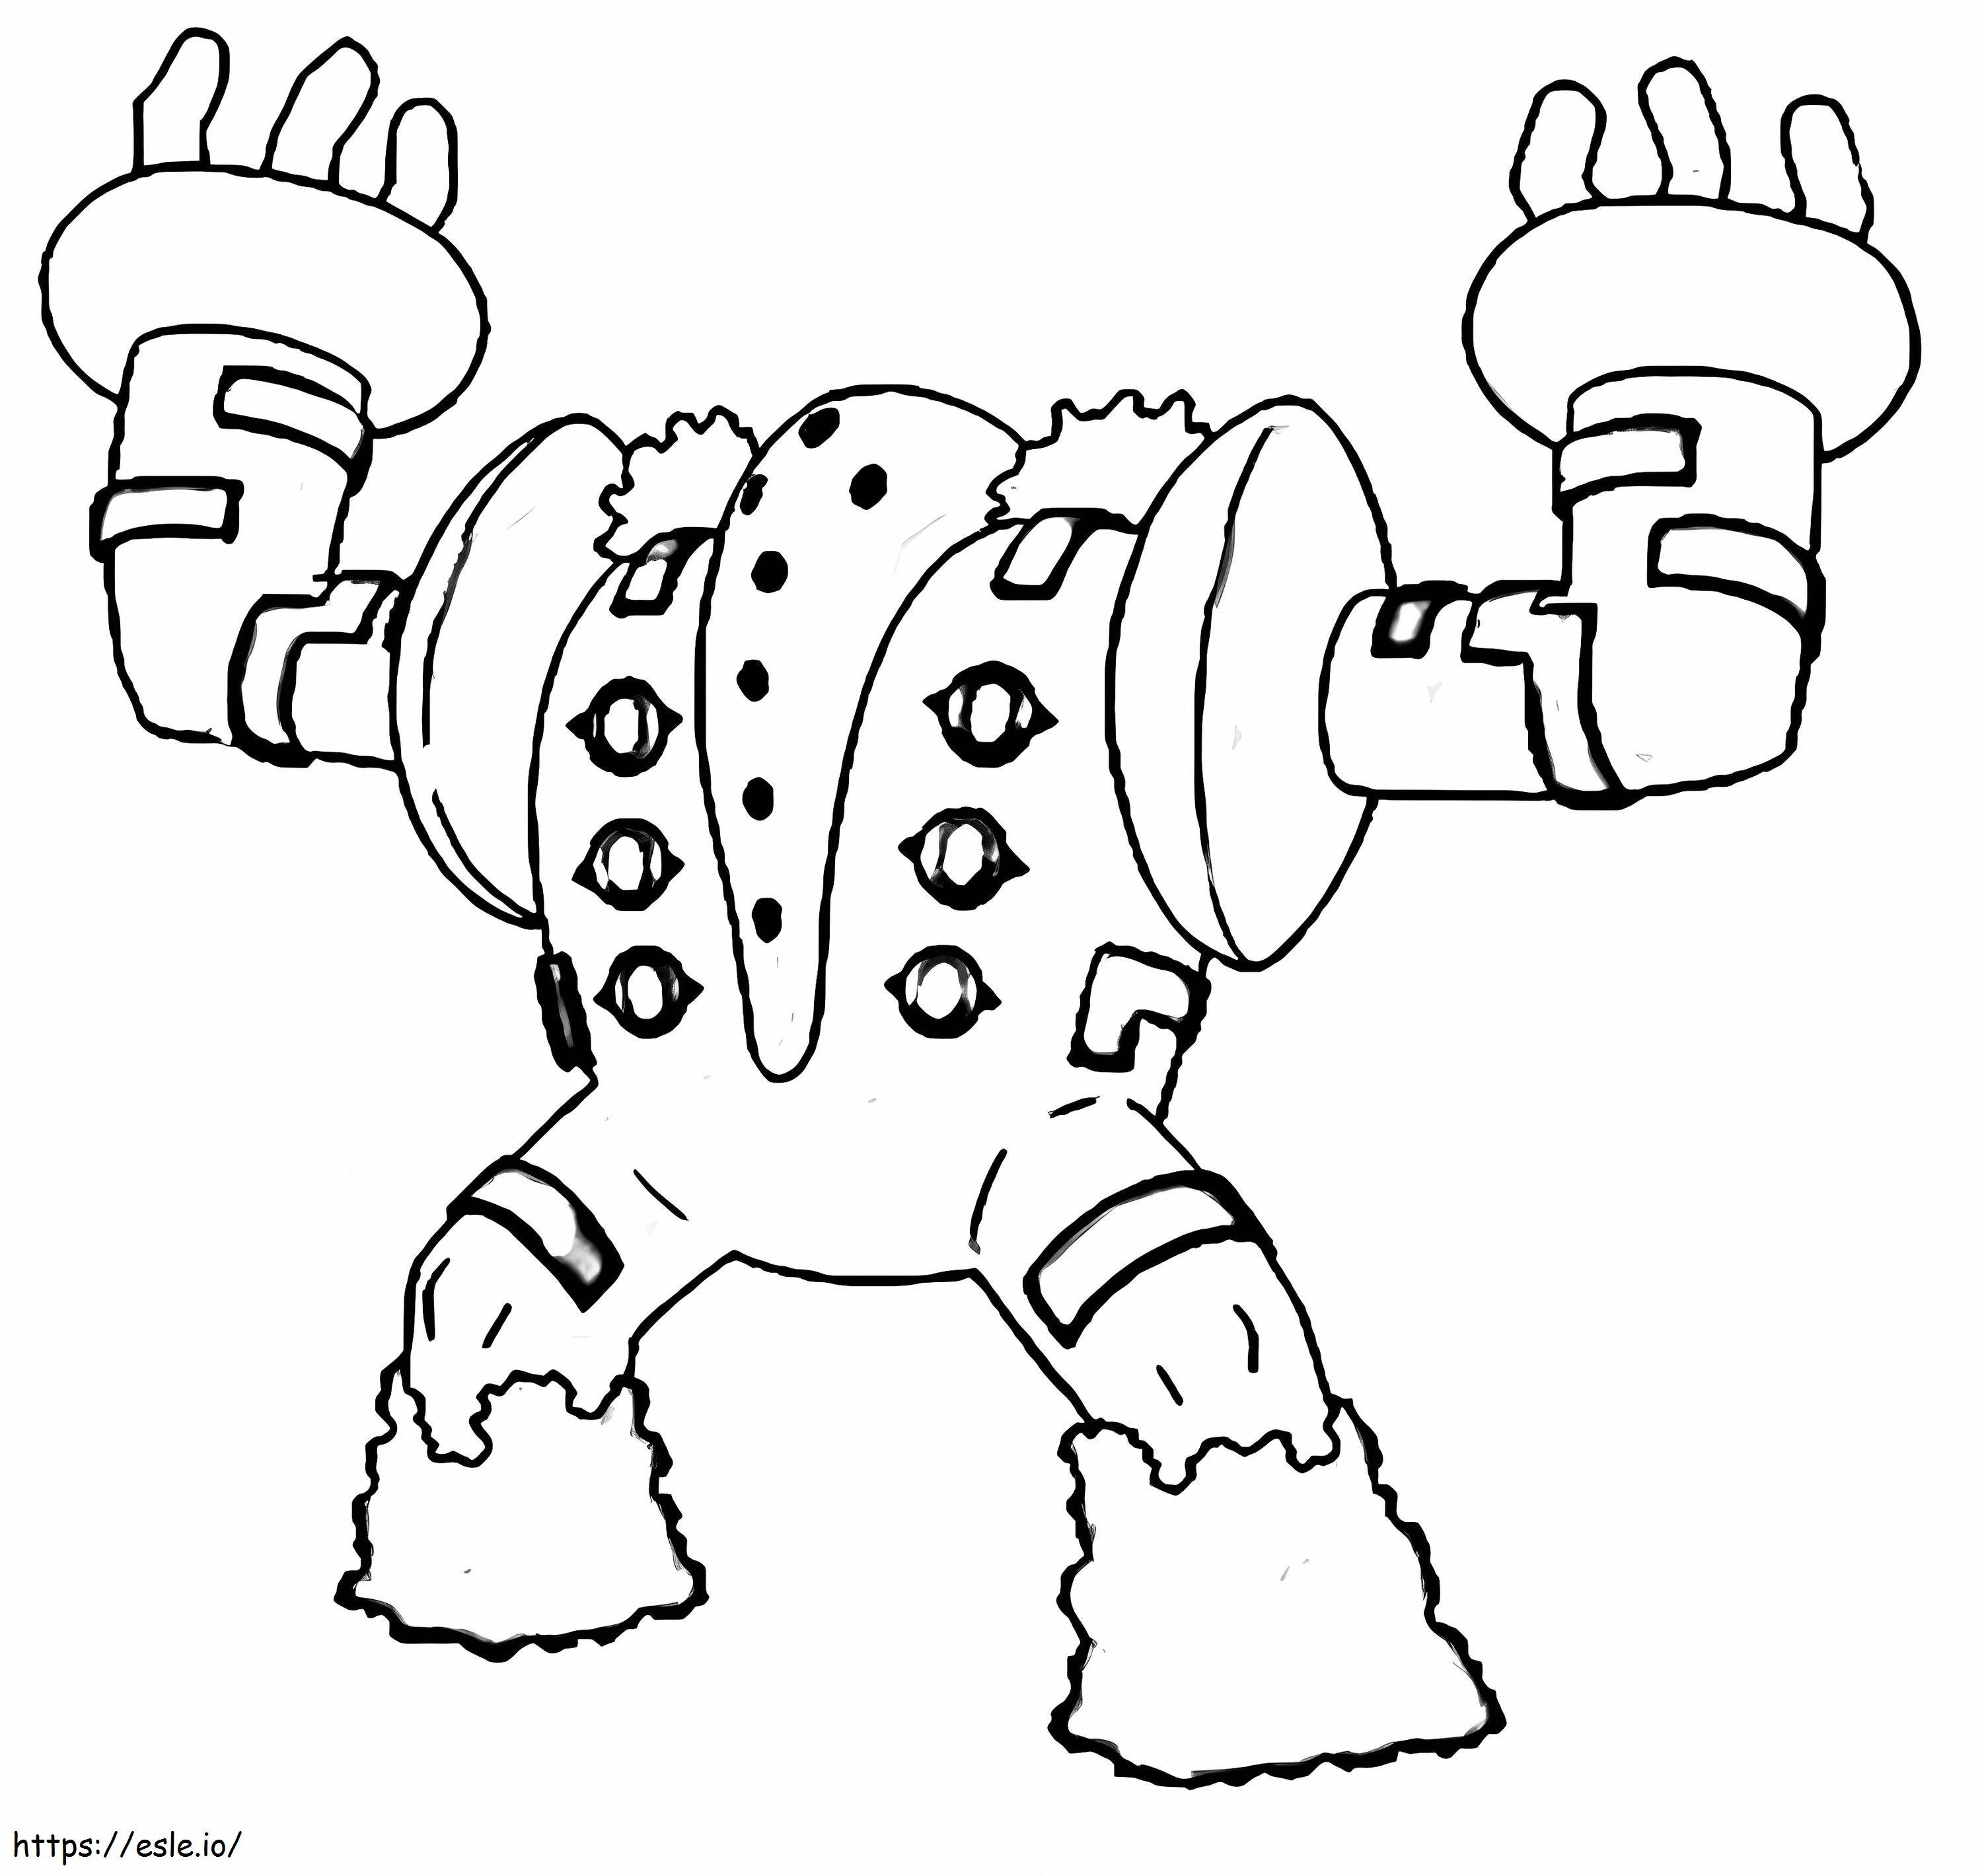 Controls 2 coloring page